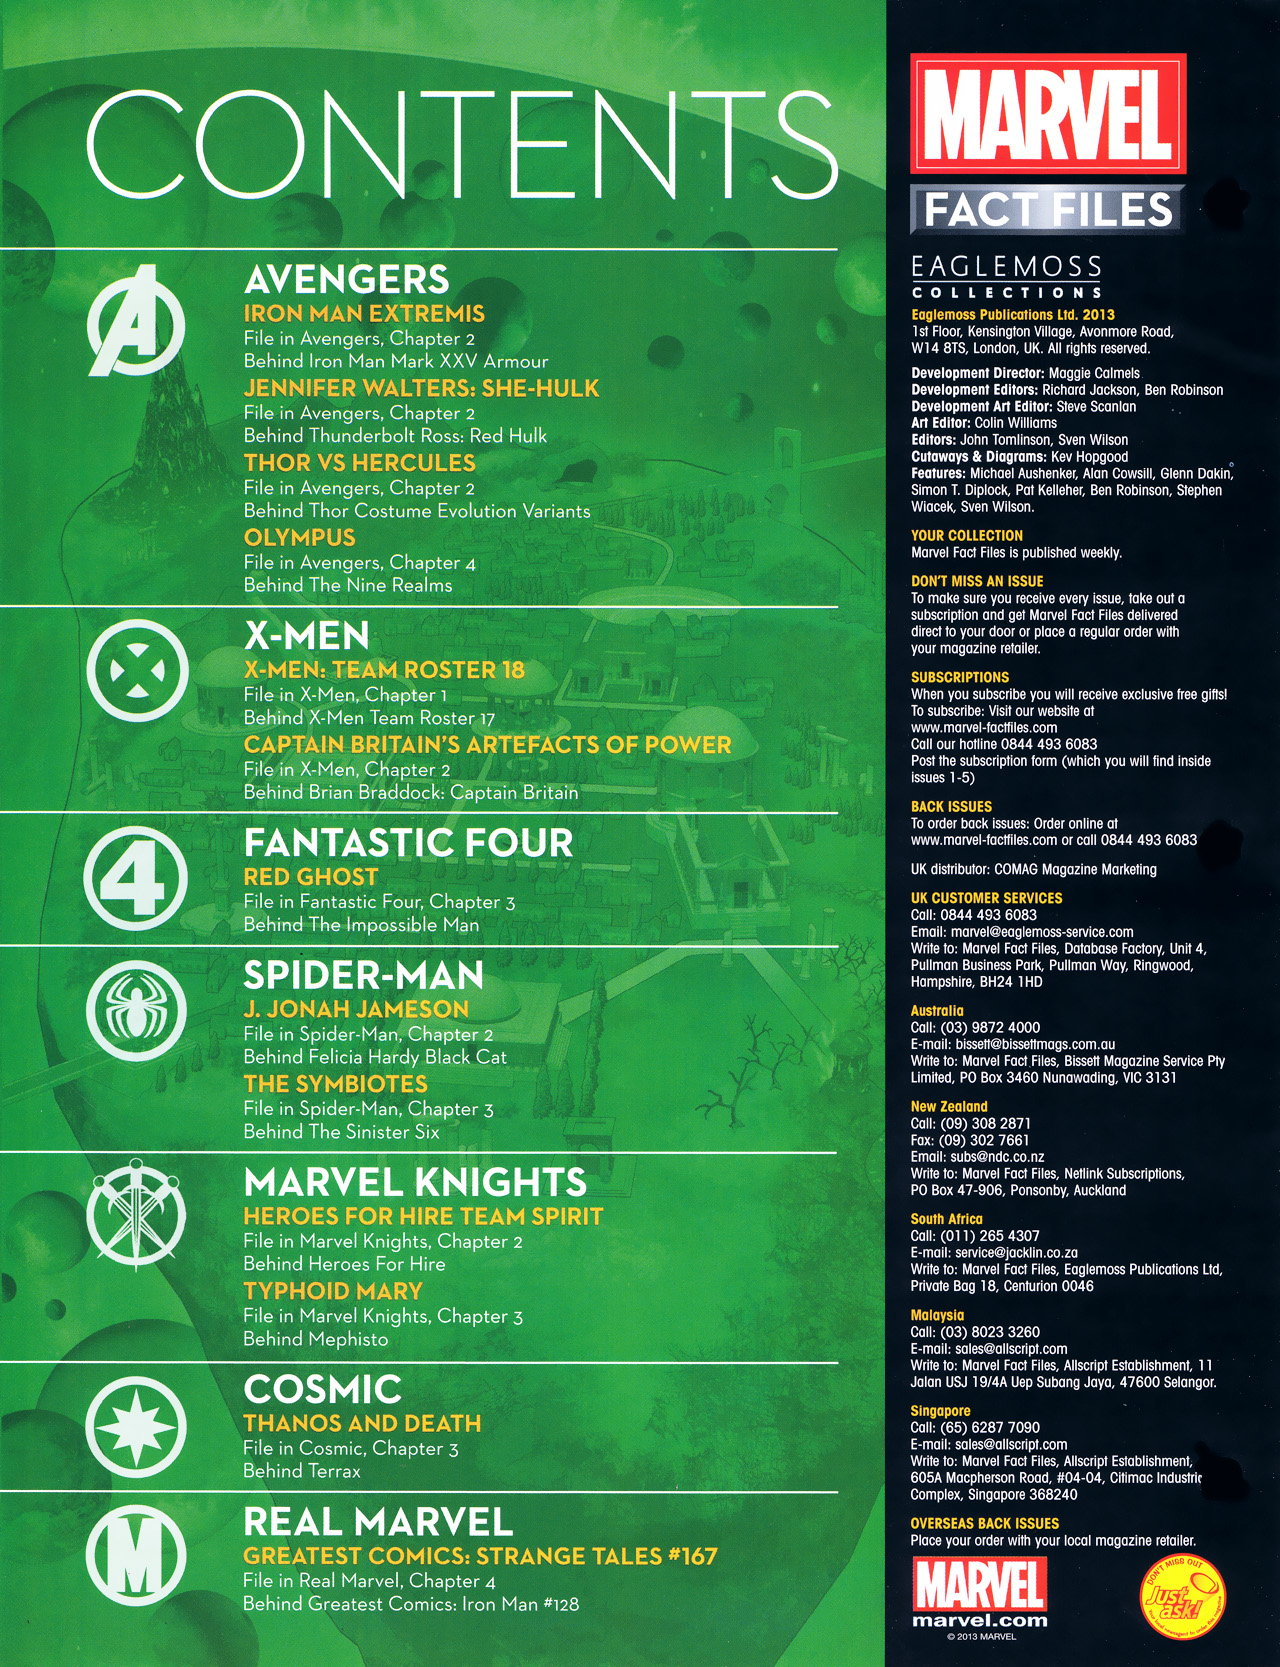 Read online Marvel Fact Files comic -  Issue #18 - 3